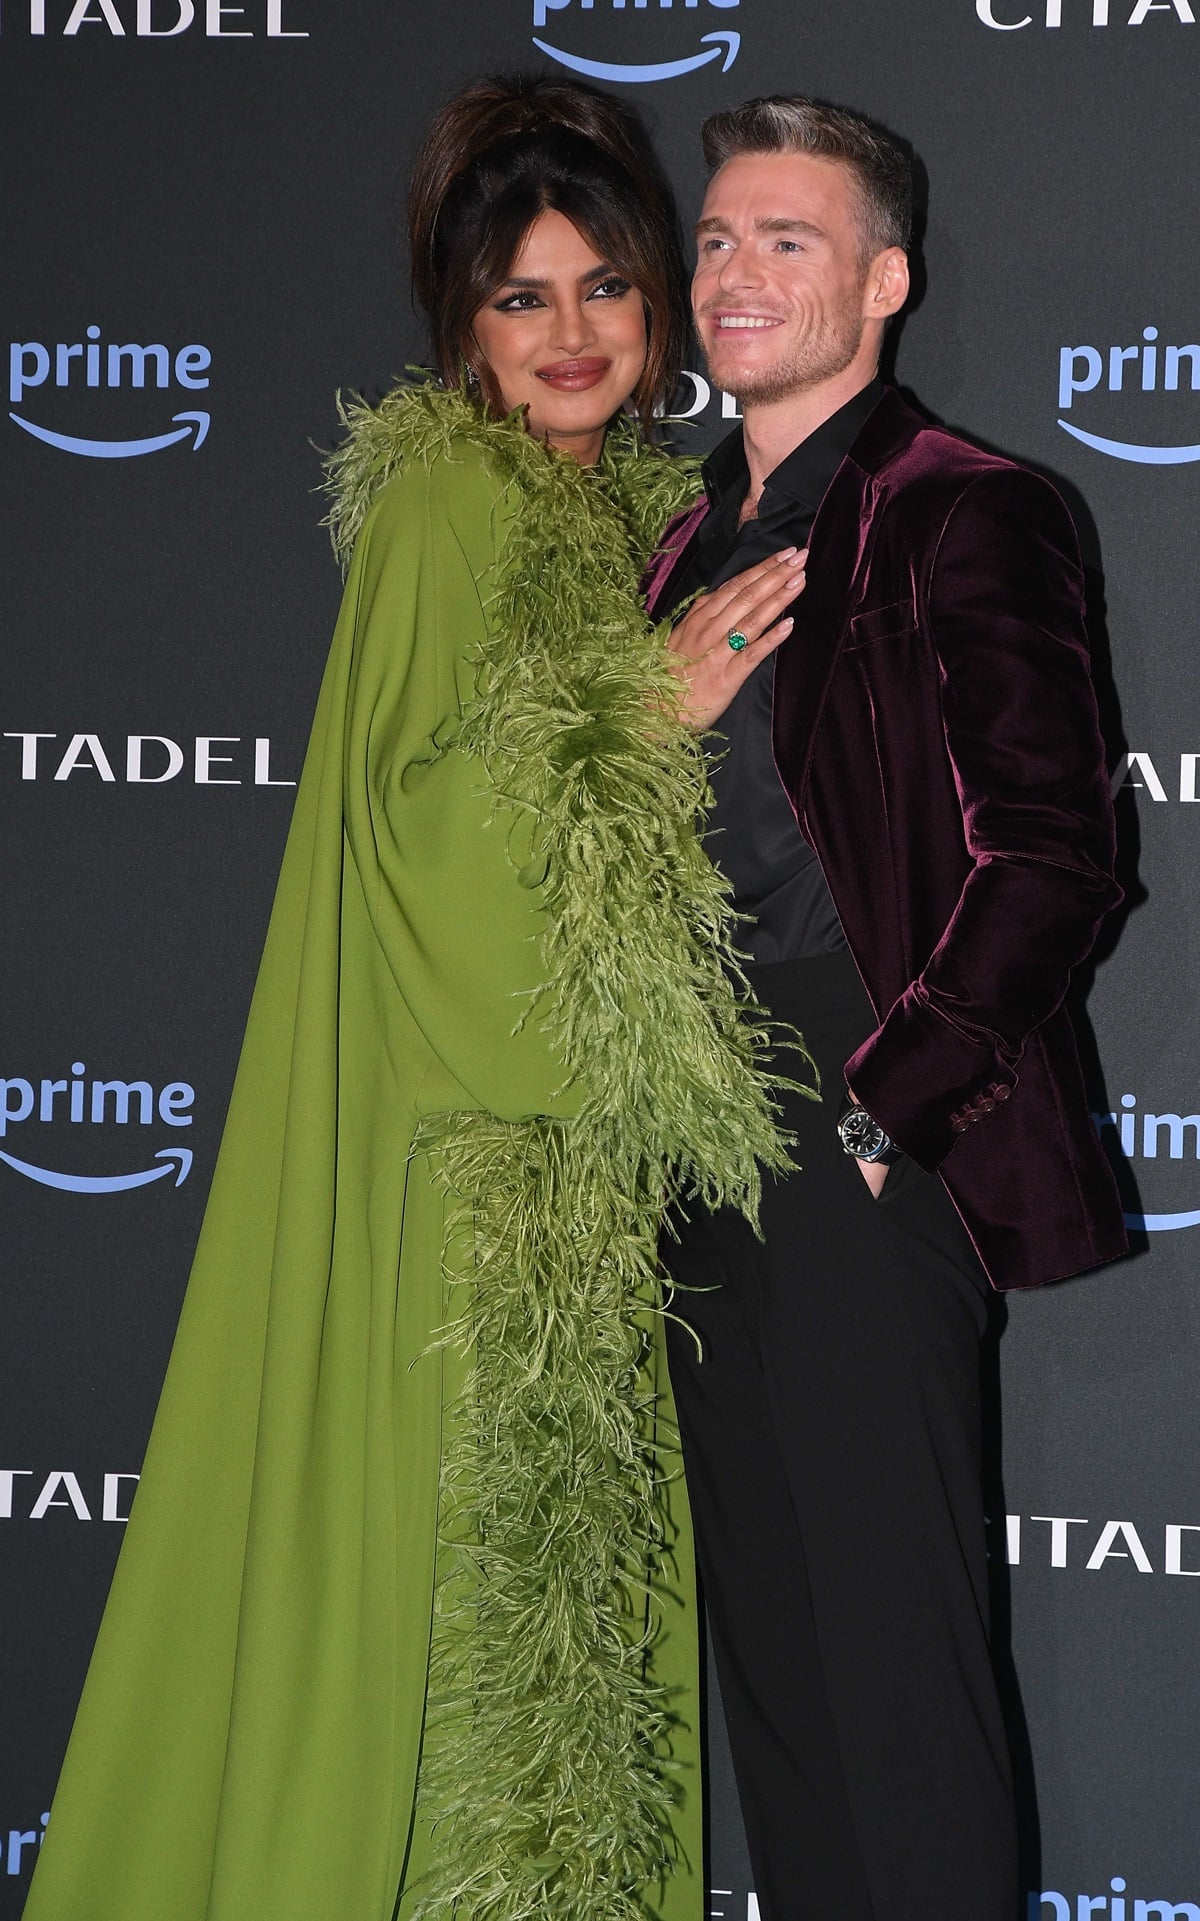 Priyanka Chopra and co-star Richard Madden were spotted sharing a warm embrace on the red carpet